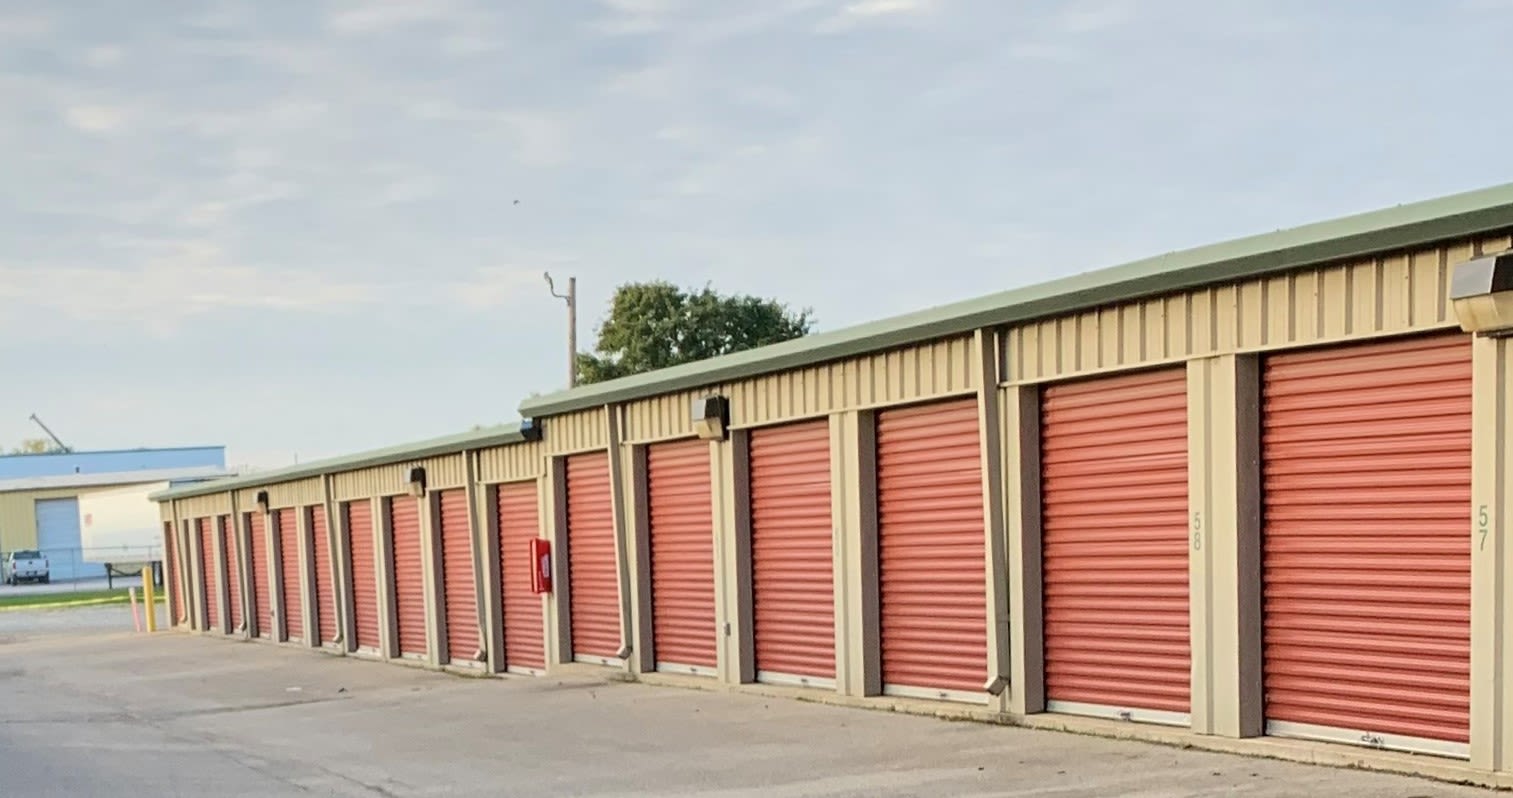 View our hours and directions at KO Storage of Tipp City in Tipp City, Ohio